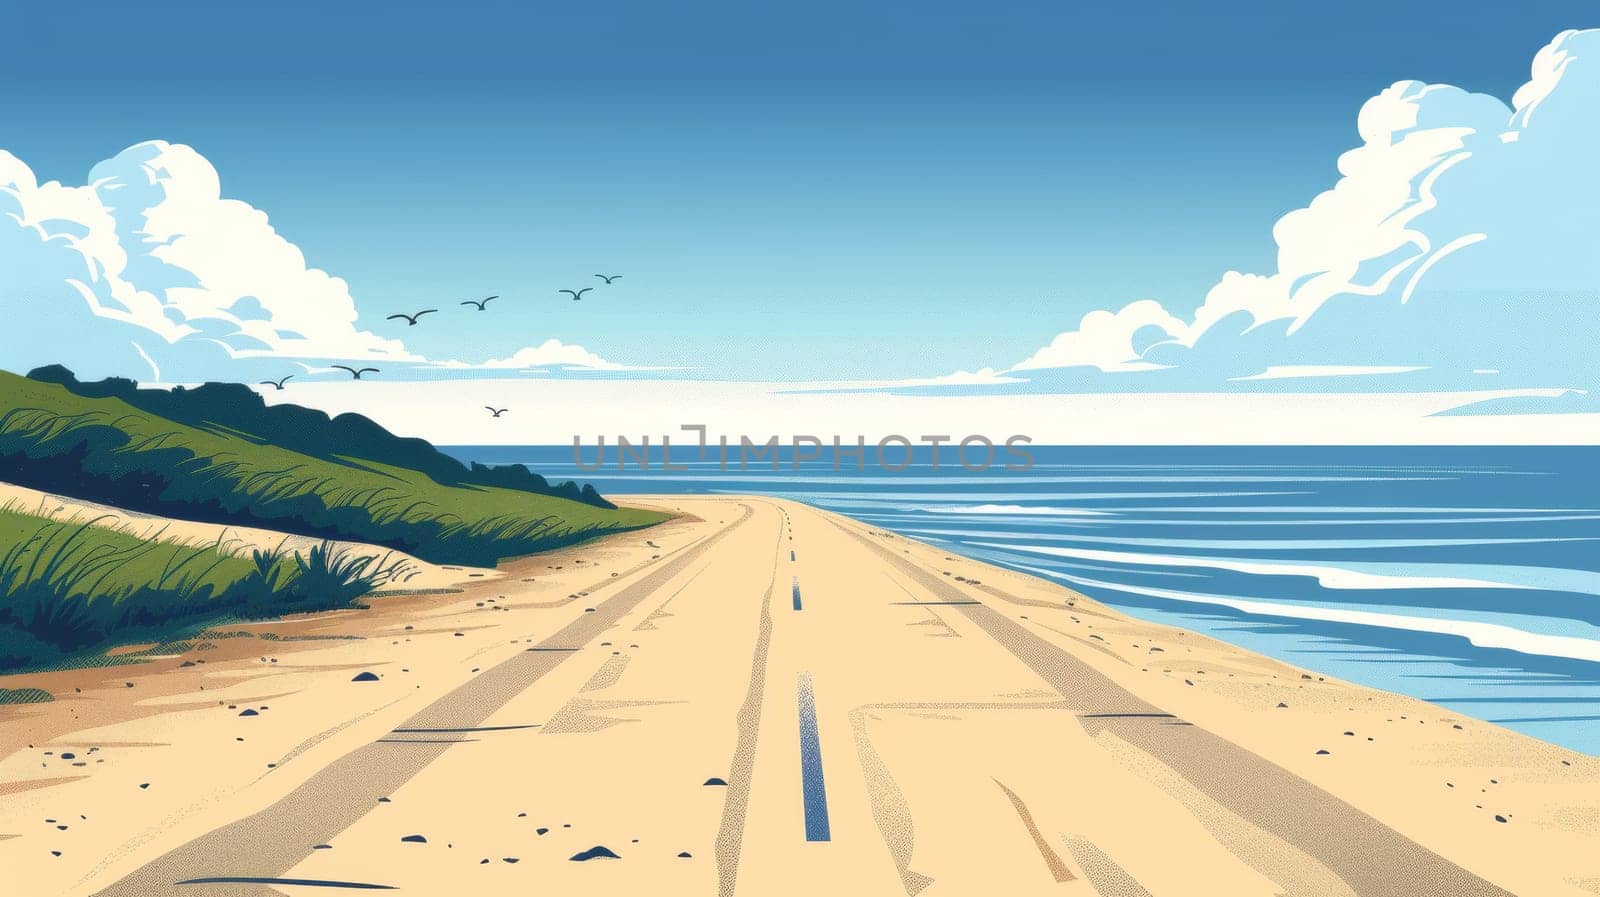 A cartoon drawing of a road leading to the ocean